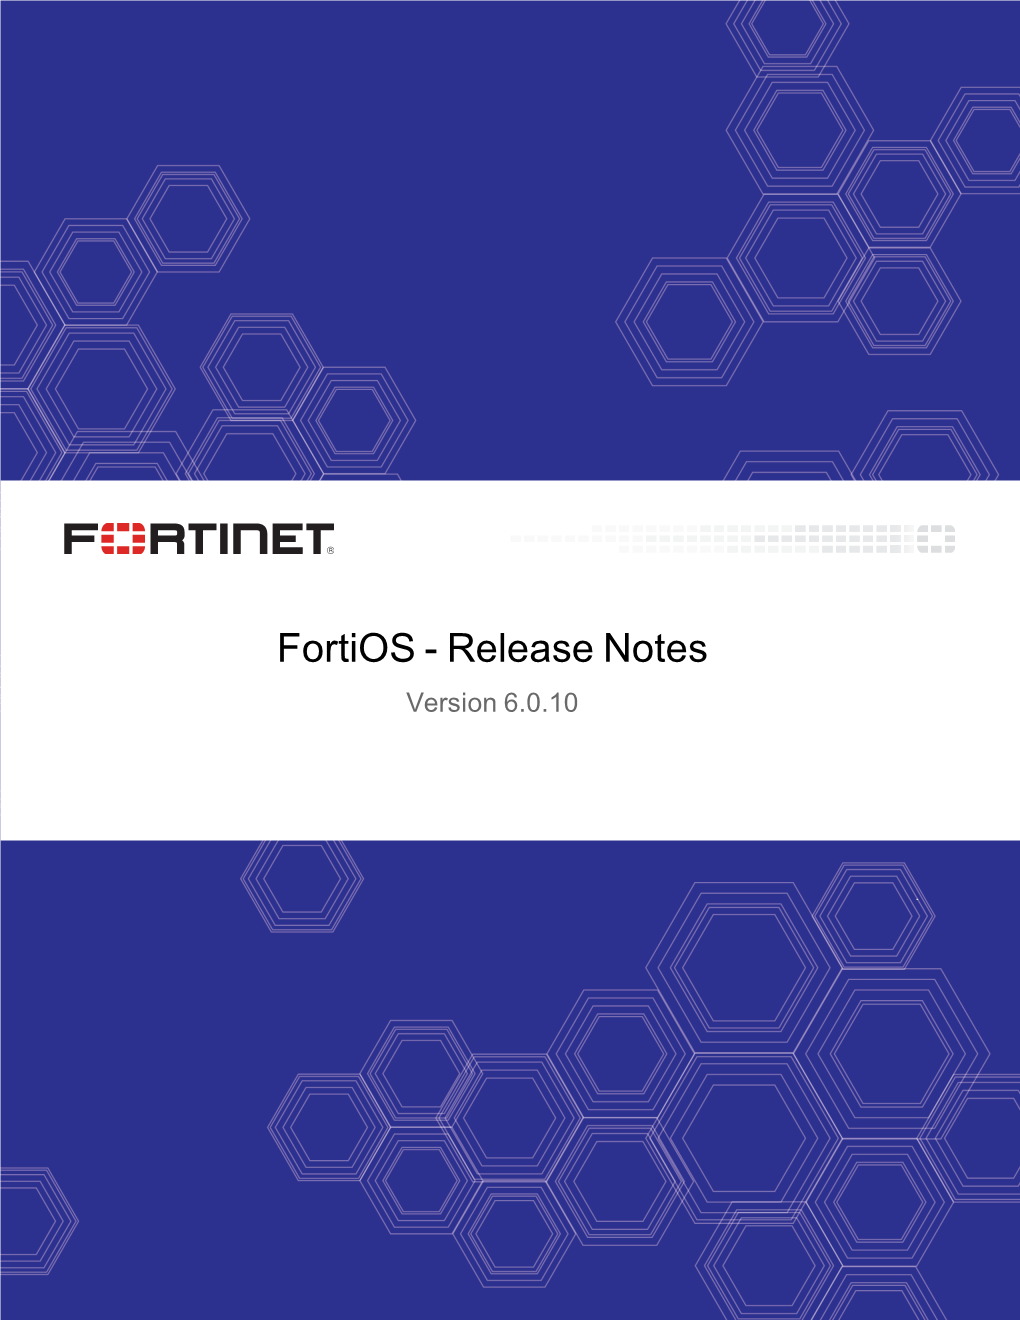 Fortios 6.0.10 Release Notes 01-6010-640265-20200928 TABLE of CONTENTS